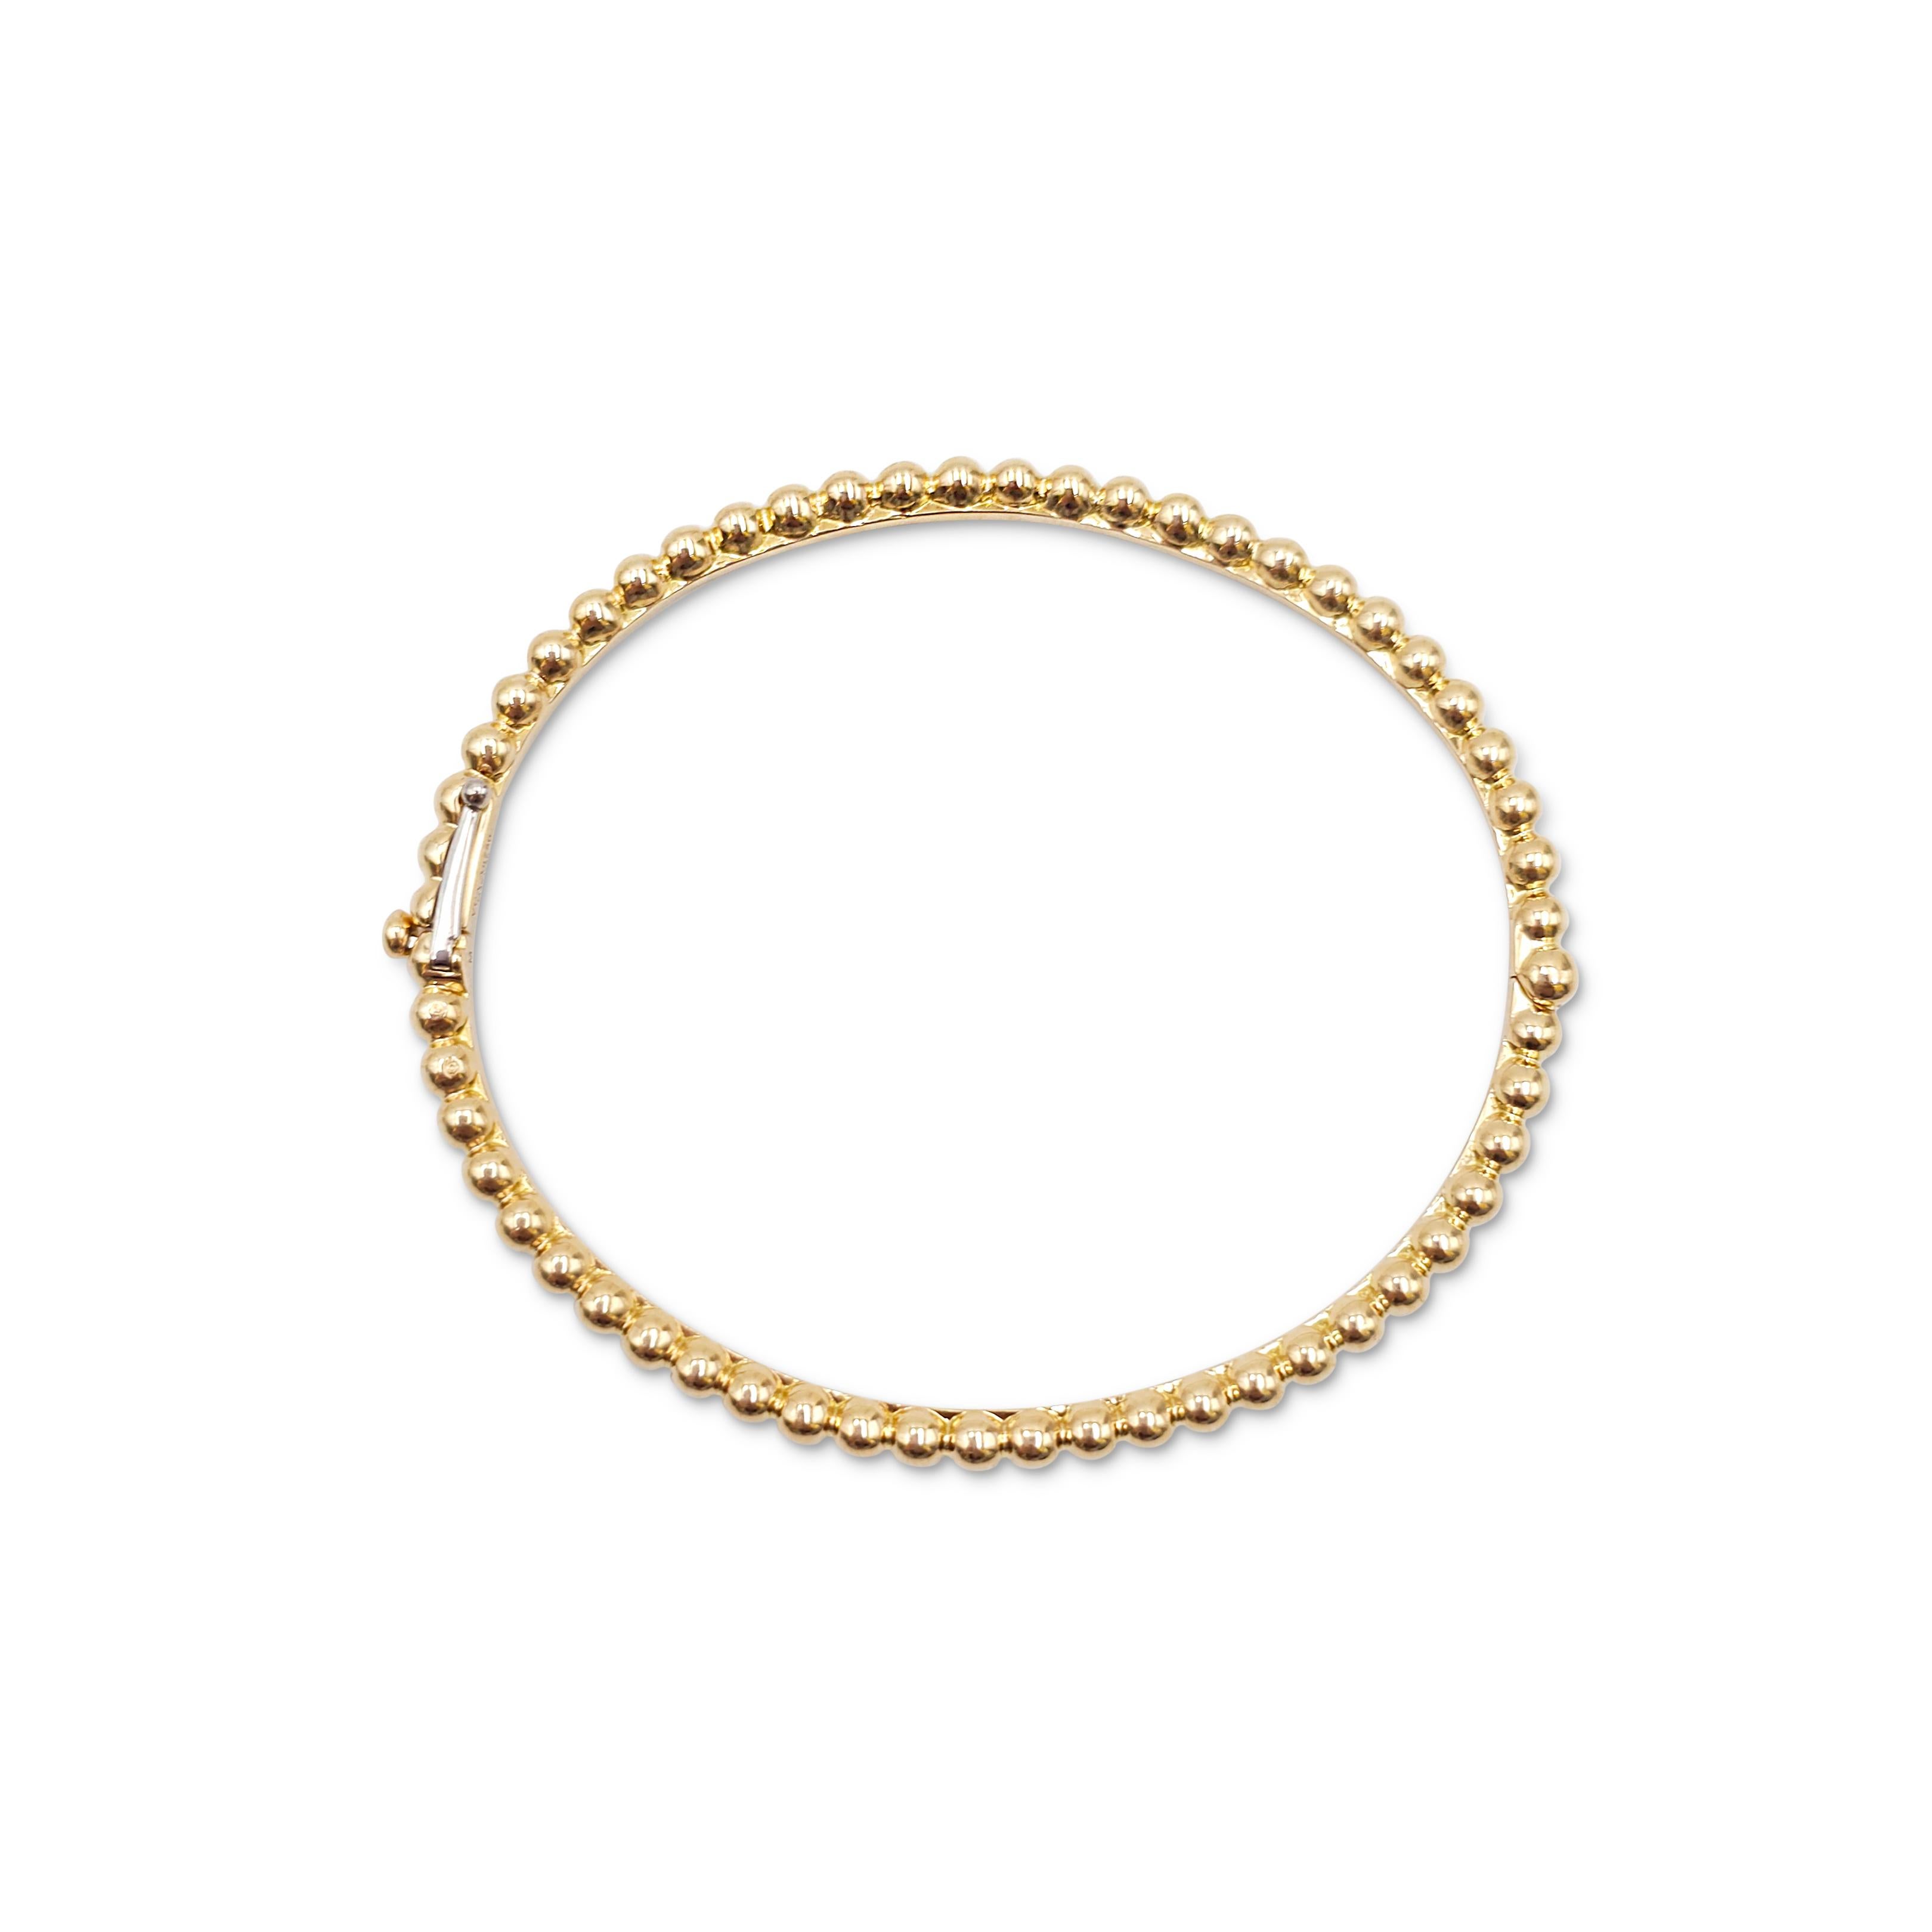 Authentic Van Cleef & Arpels Pearls of Gold bracelet from the Perlée collection crafted in 18 karat yellow gold.  The bracelet is comprised of a single row of perlée beads.  Size medium (will fit a 6.3 inch wrist).  Signed VCA Au750, M, with serial